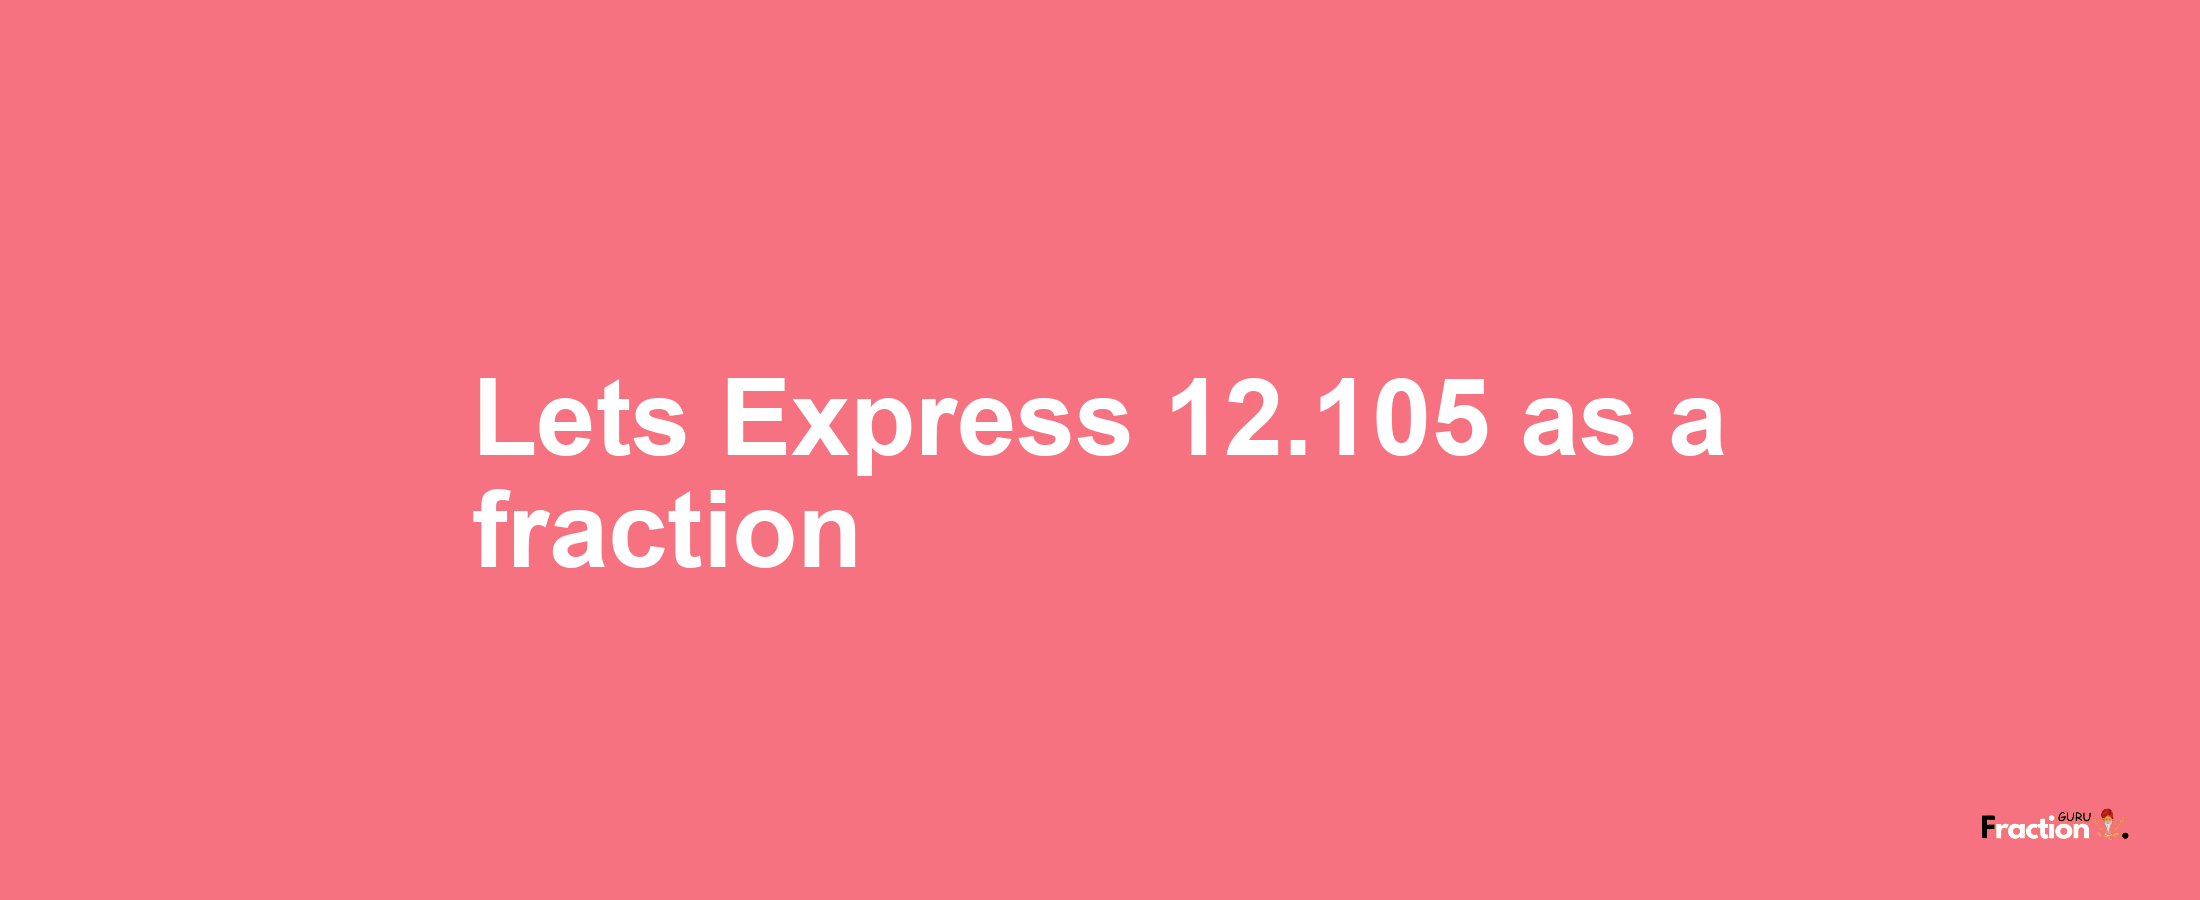 Lets Express 12.105 as afraction